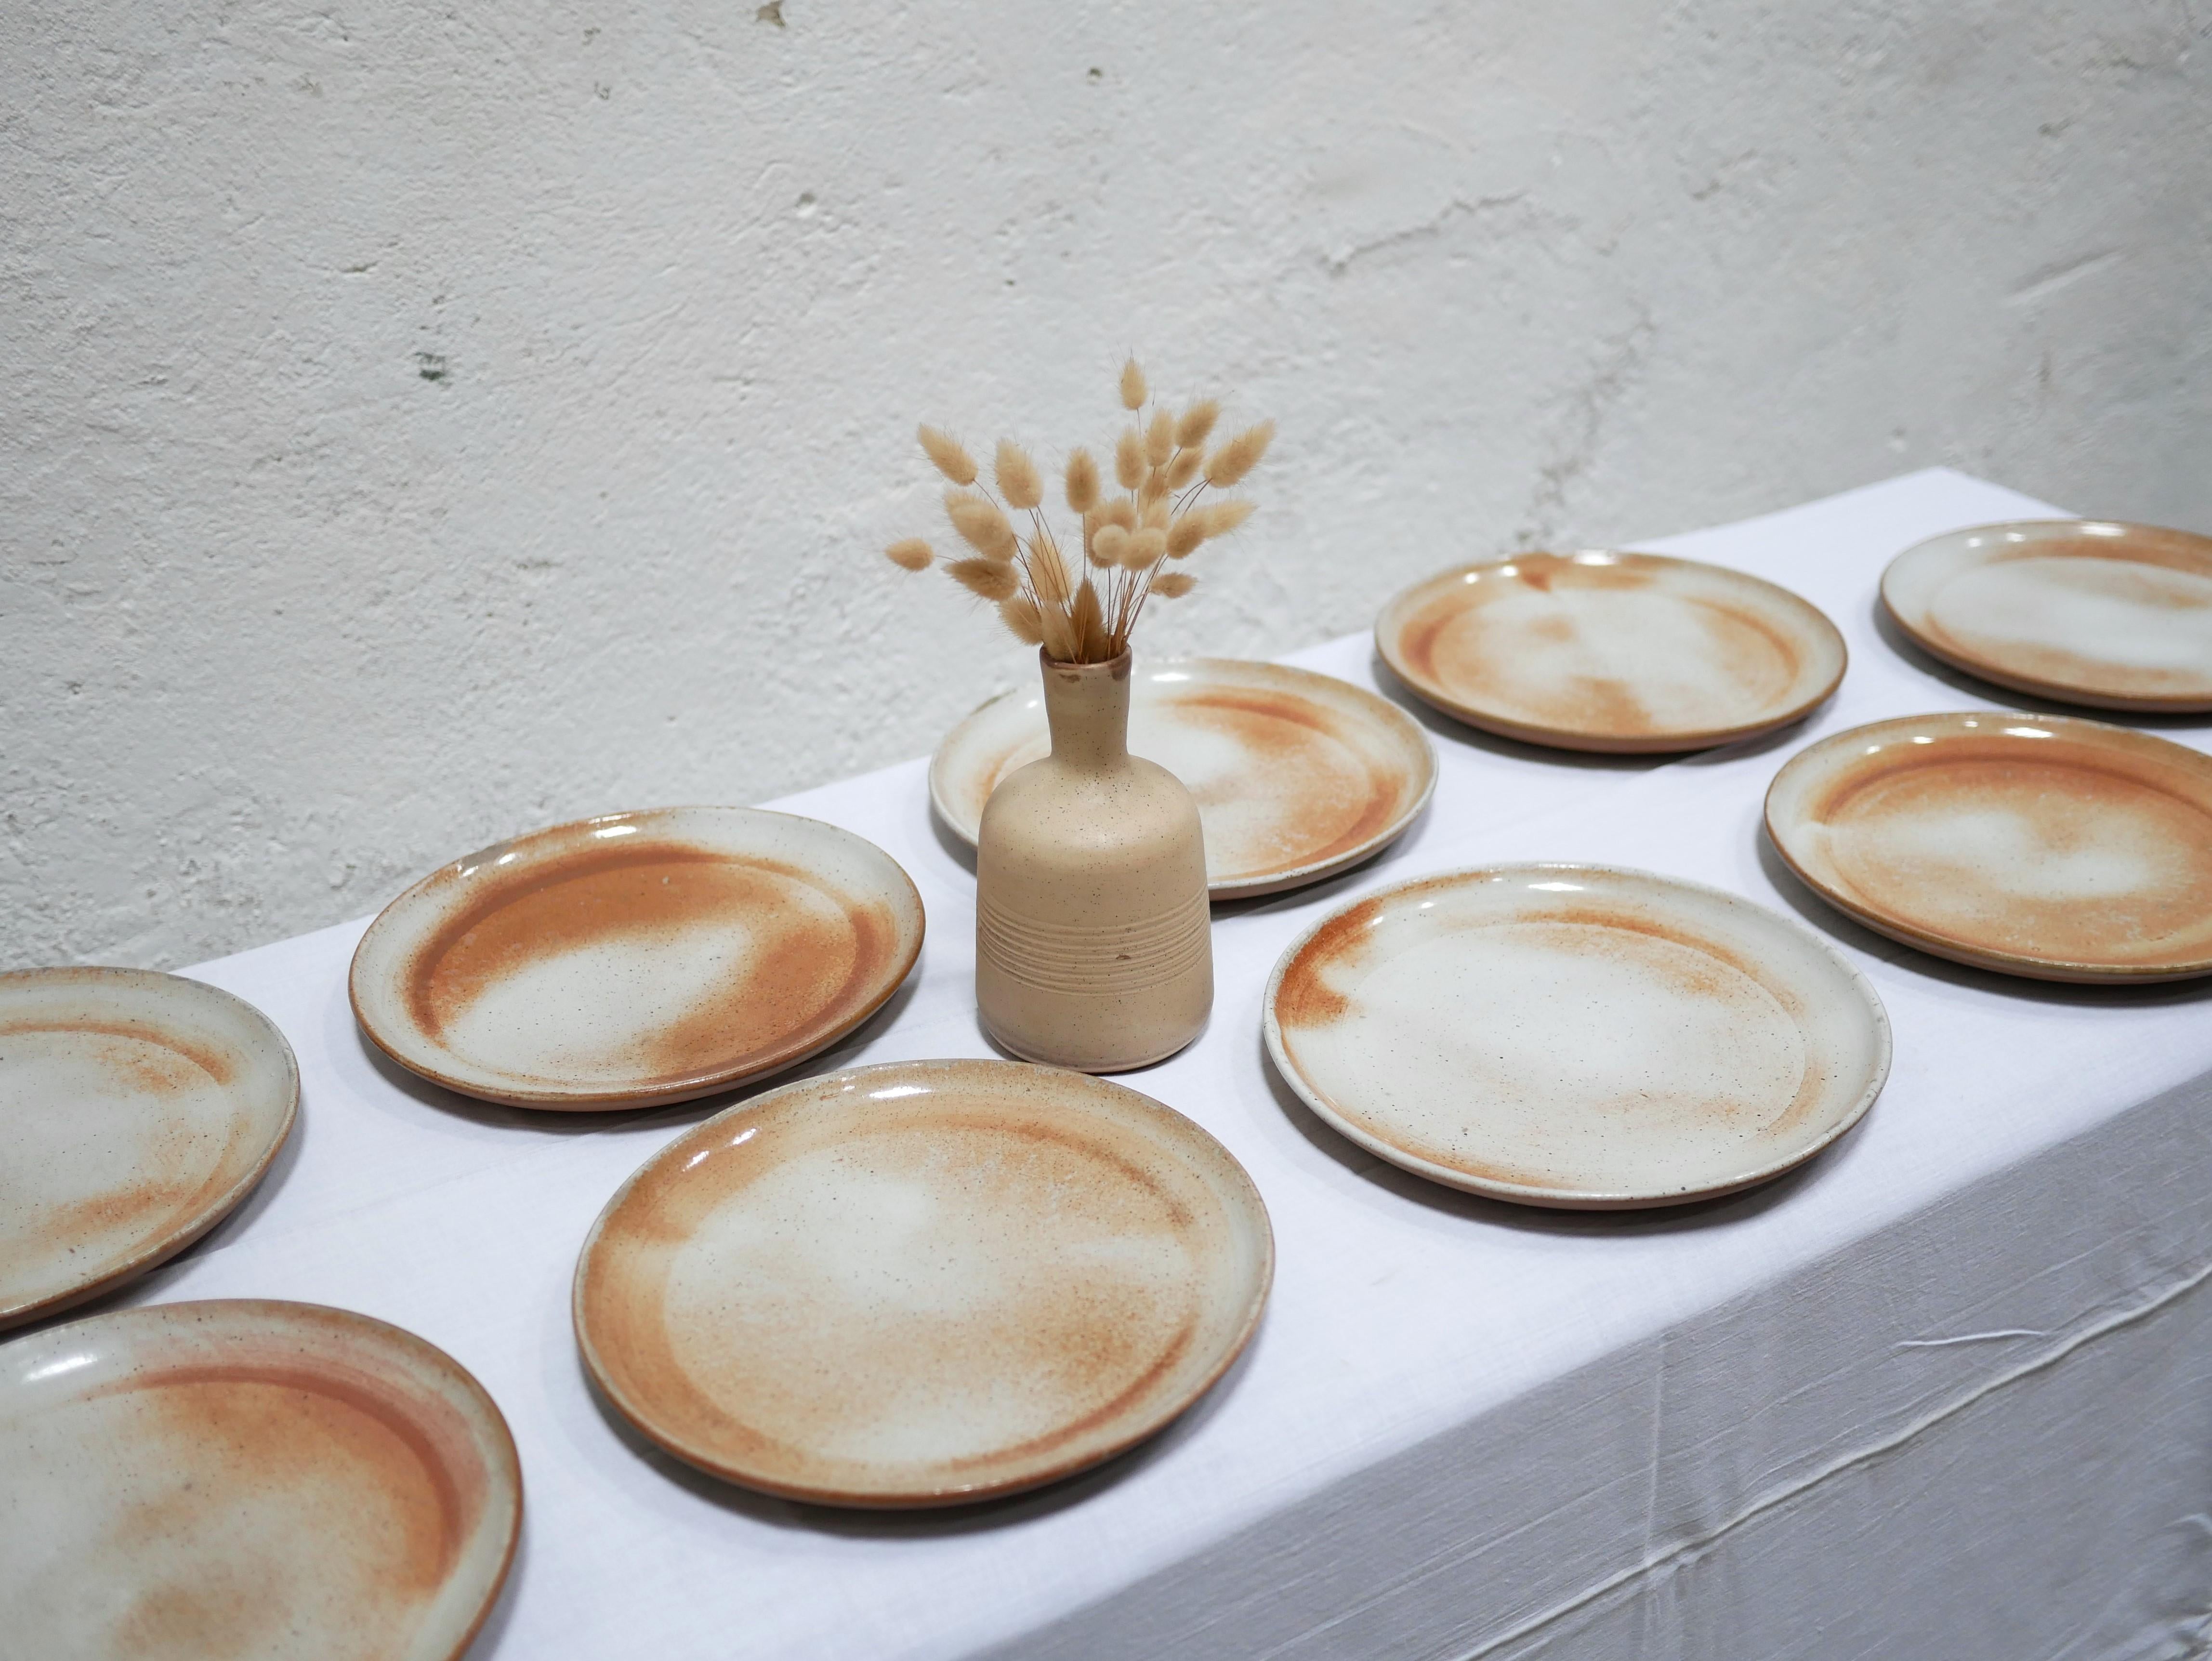 20th Century Series of 9 vintage stoneware plates by the Poteries du Marais, France